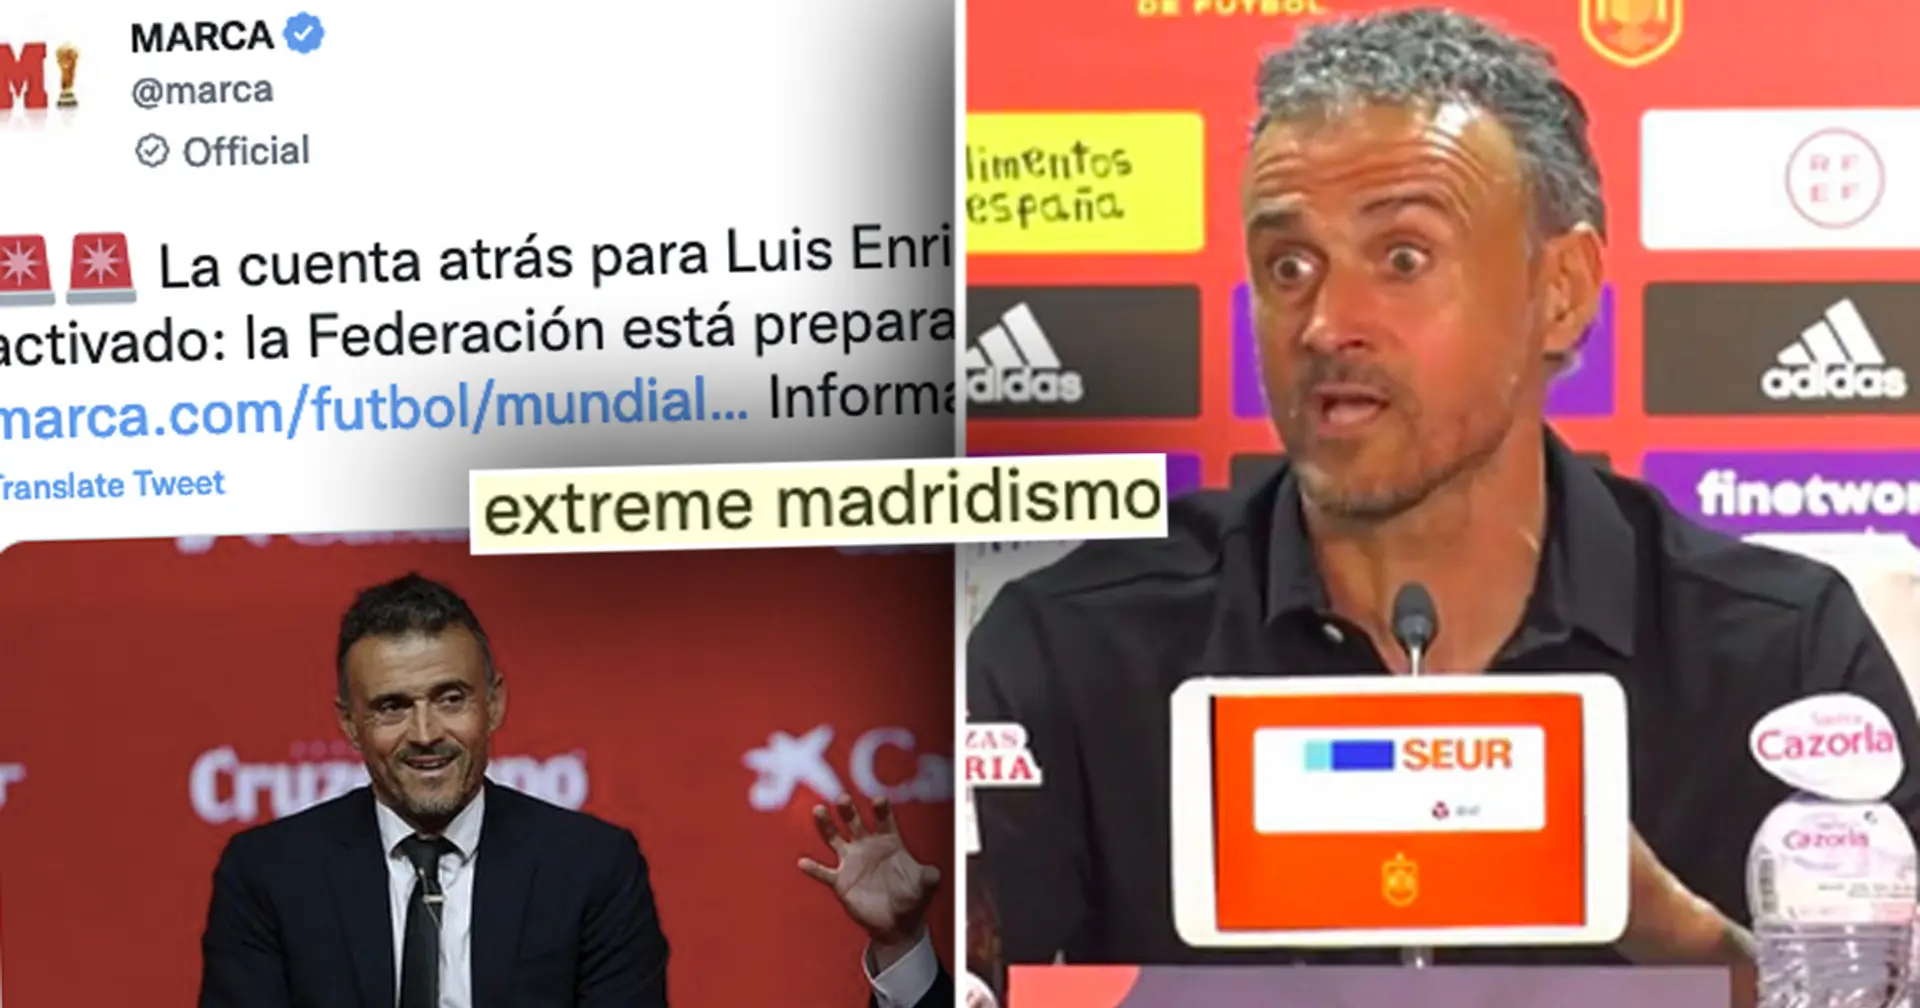 'You post it in the middle of the World Cup?!': Spain fans slam pro-Madrid media for Luis Enrique article